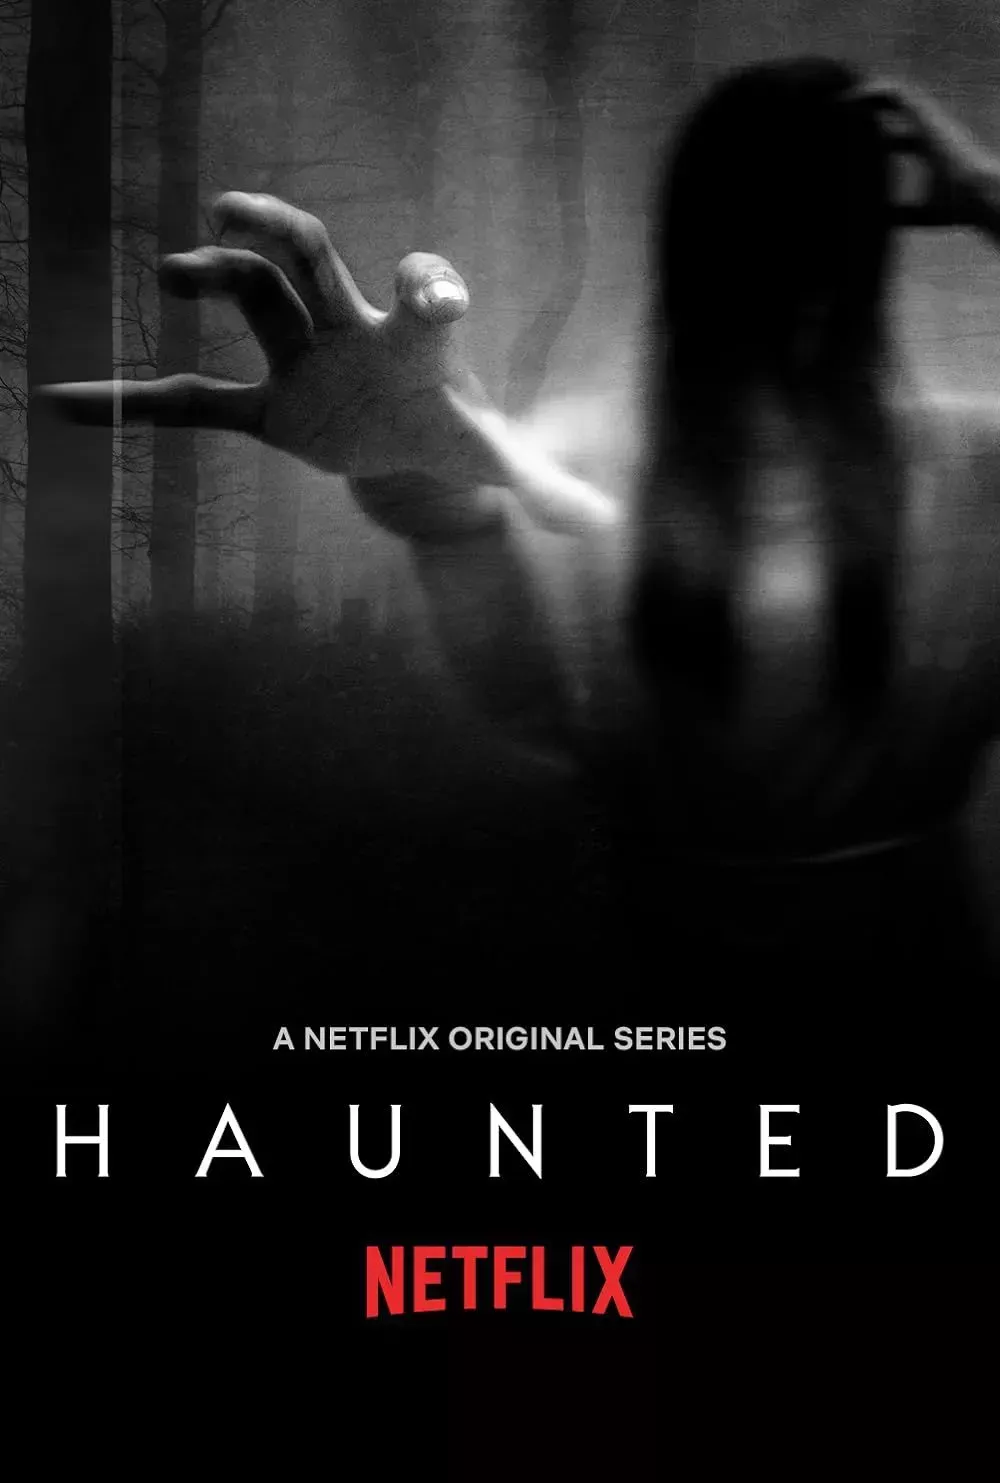 Poster for Netflix's Haunted